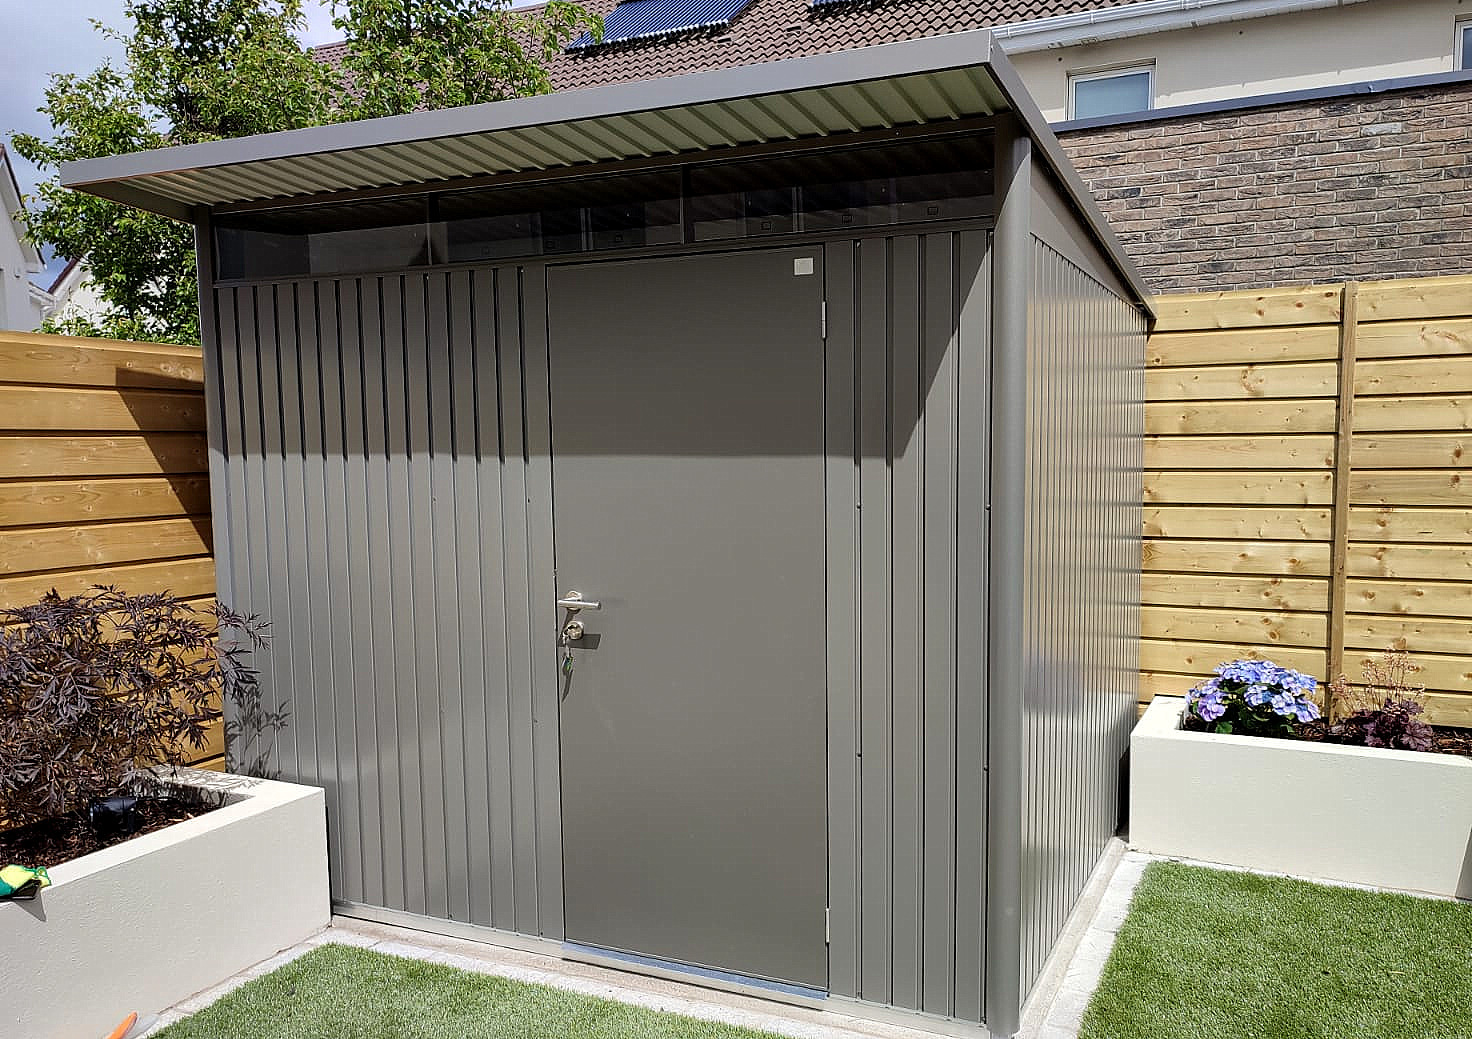 The stunning Biohort AvantGarde A6 garden shed in metallic quartz grey, supplied + fitted in Carpenterstown, Dublin 15  | Owen Chubb Garden Landscapers, Ireland's #1 Biohort Dealer offering unbeatable value and full supply + fit services nationwide.